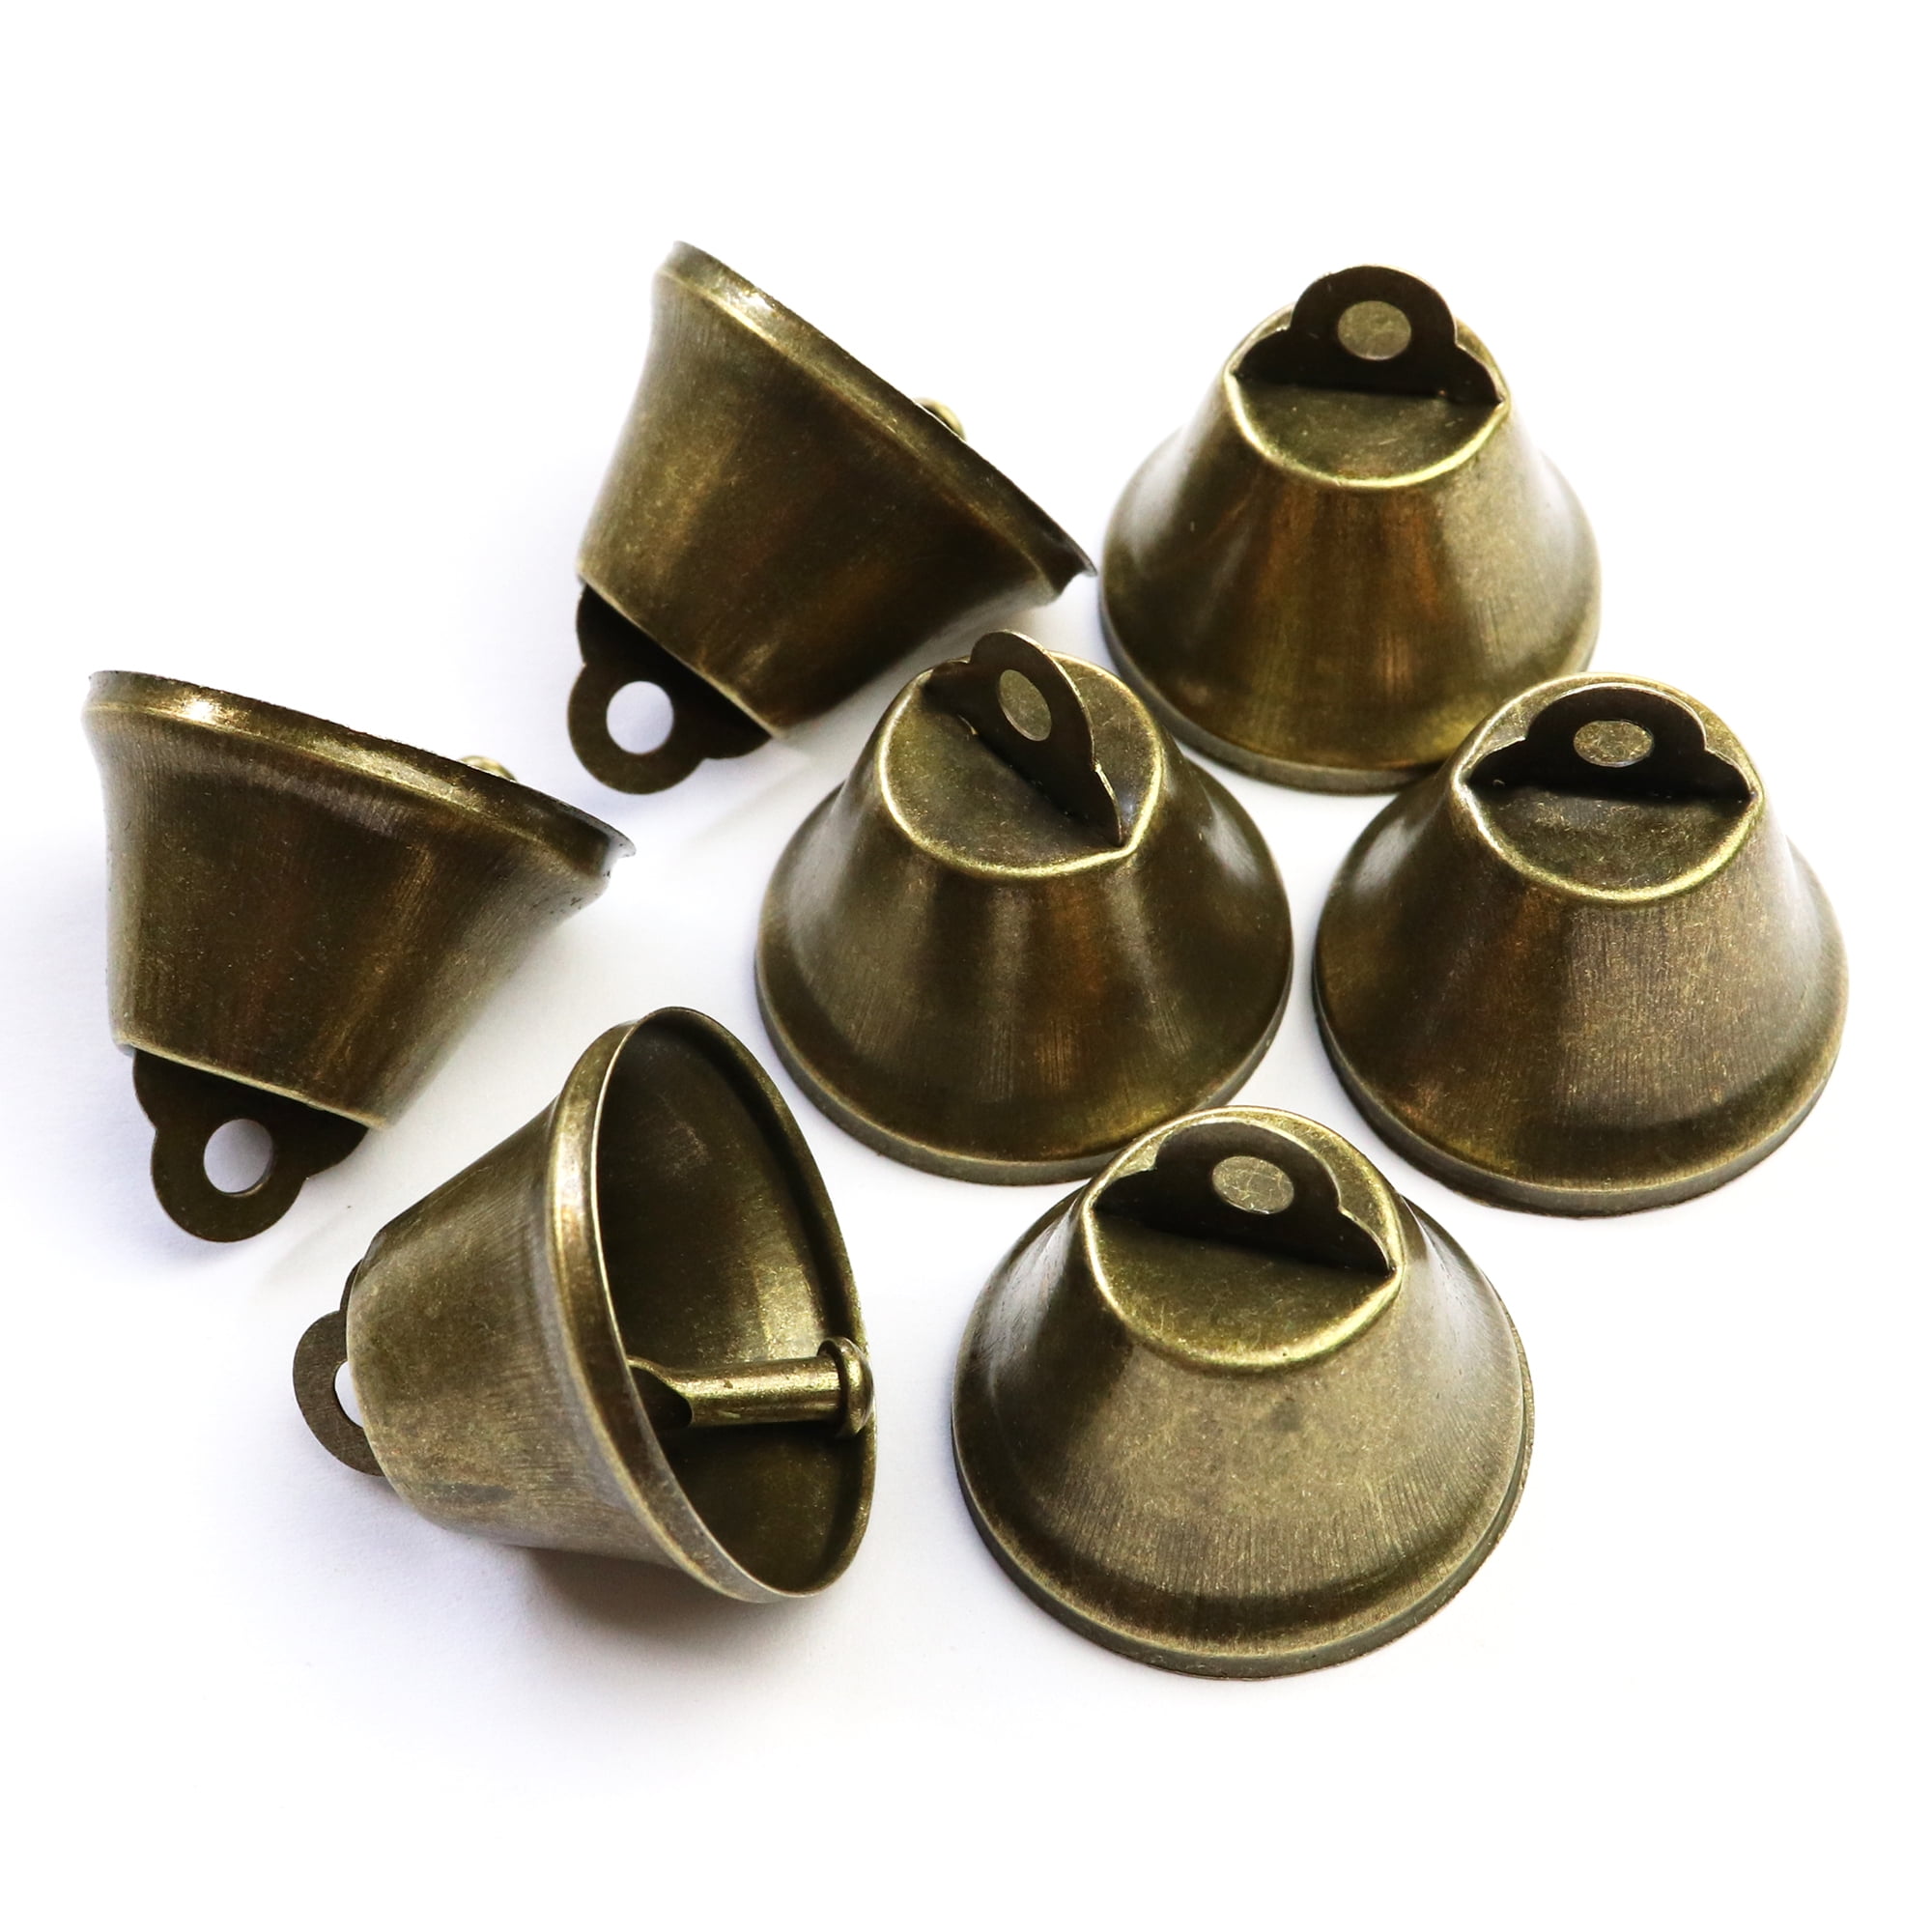 Vintage Bronze Jingle Bells Craft Bells 25mm / 1 Inch for Dog Potty  Training, Housebreaking, Wind Chimes, Christmas Bell (50 Pieces) 